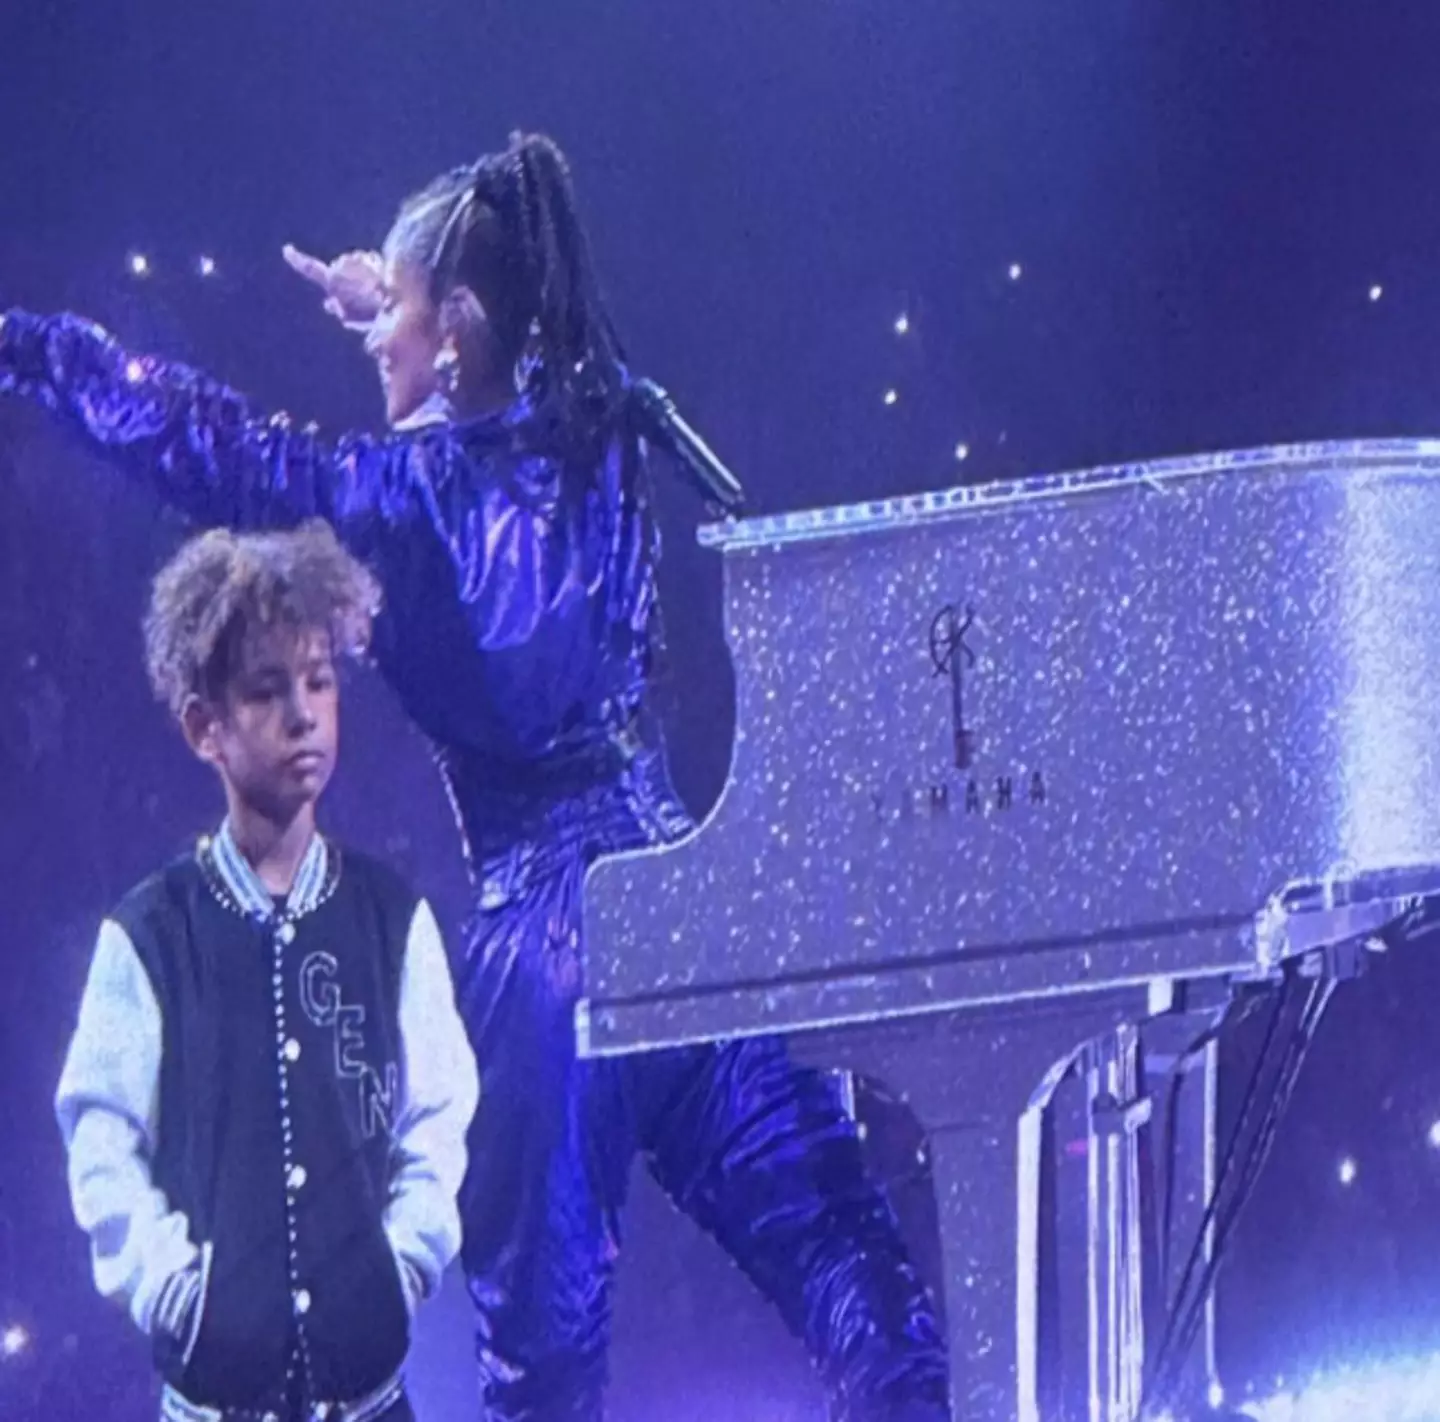 Alicia Key's son actually took to the stage for her 'protection'.